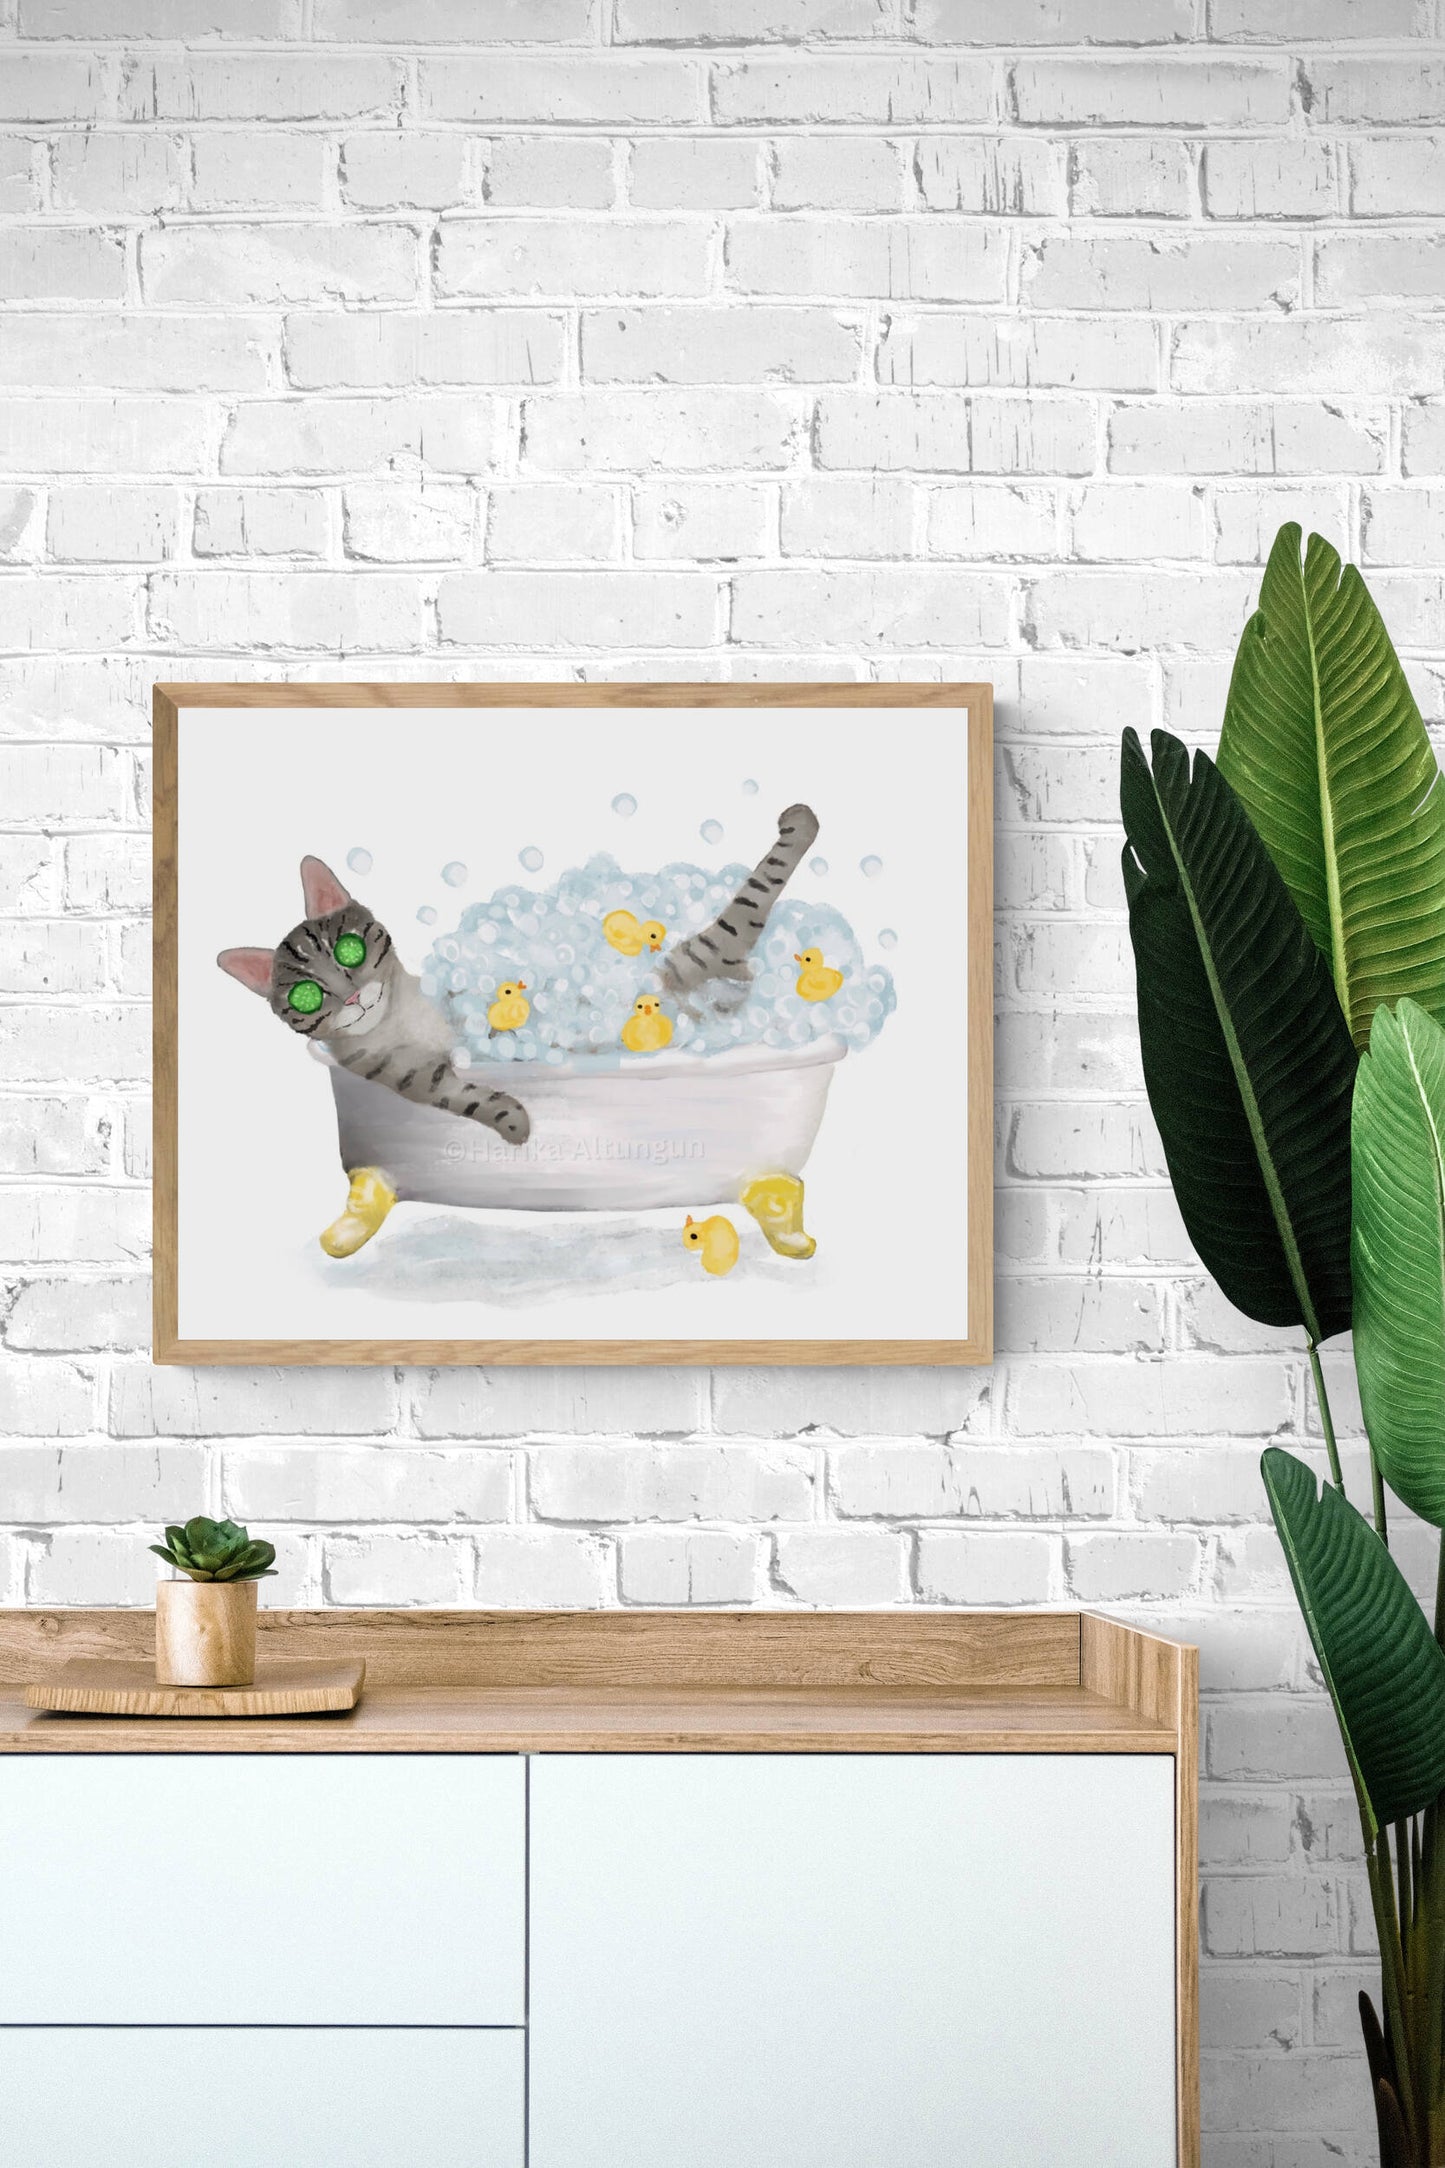 Gray Tabby Cat Bathing Print, Funny Bubble Bath Time, Bathroom Cat Painting, Cat Relaxing In Bath Print, Cat Lover Gift, Ct Mom Dad Gift